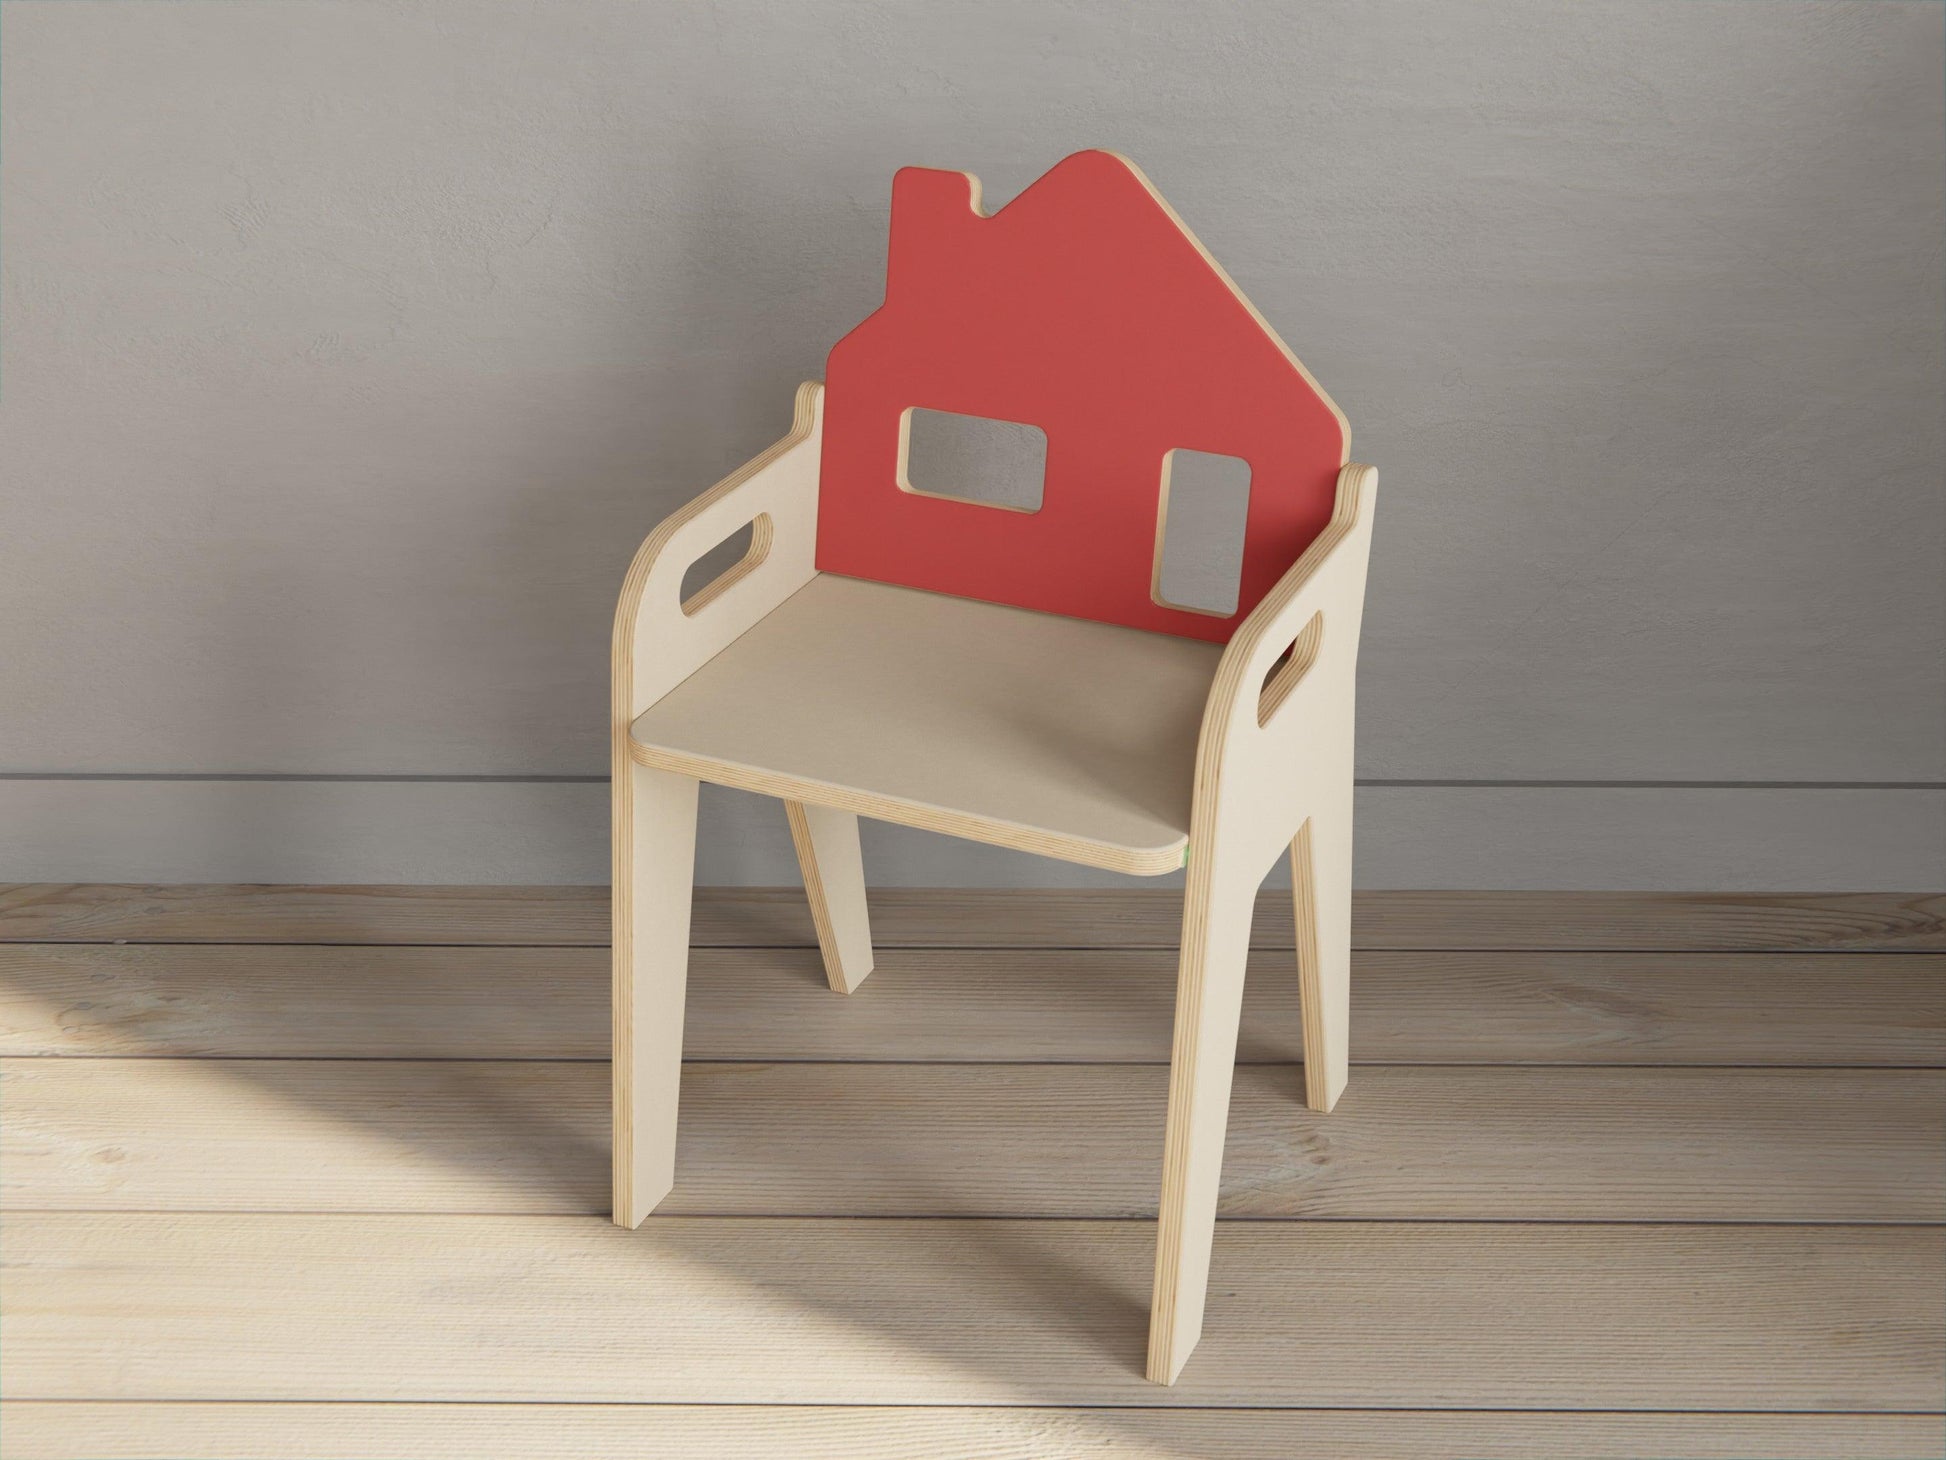 The perfect seat for your child: Our durable, wooden Red Kids Chair. Ideal for ages 4-7.